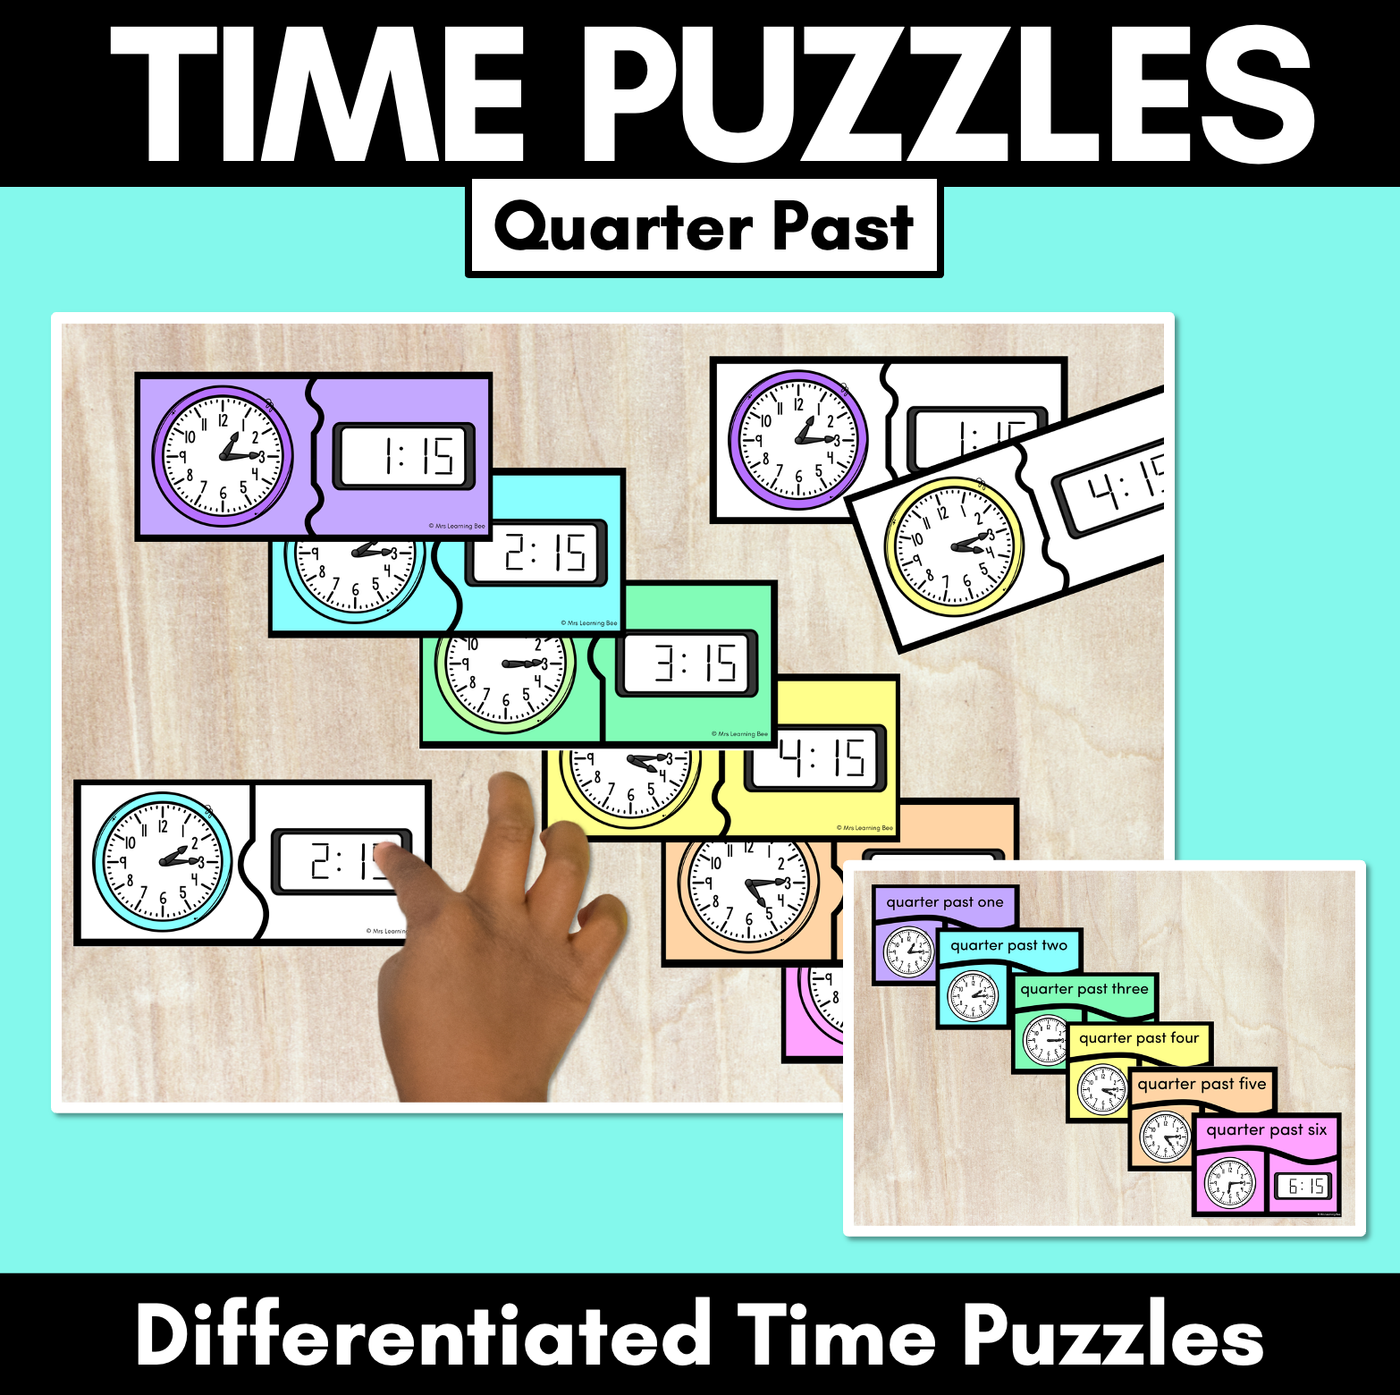 TIME PUZZLES - Quarter Past - Digital and Analog Time